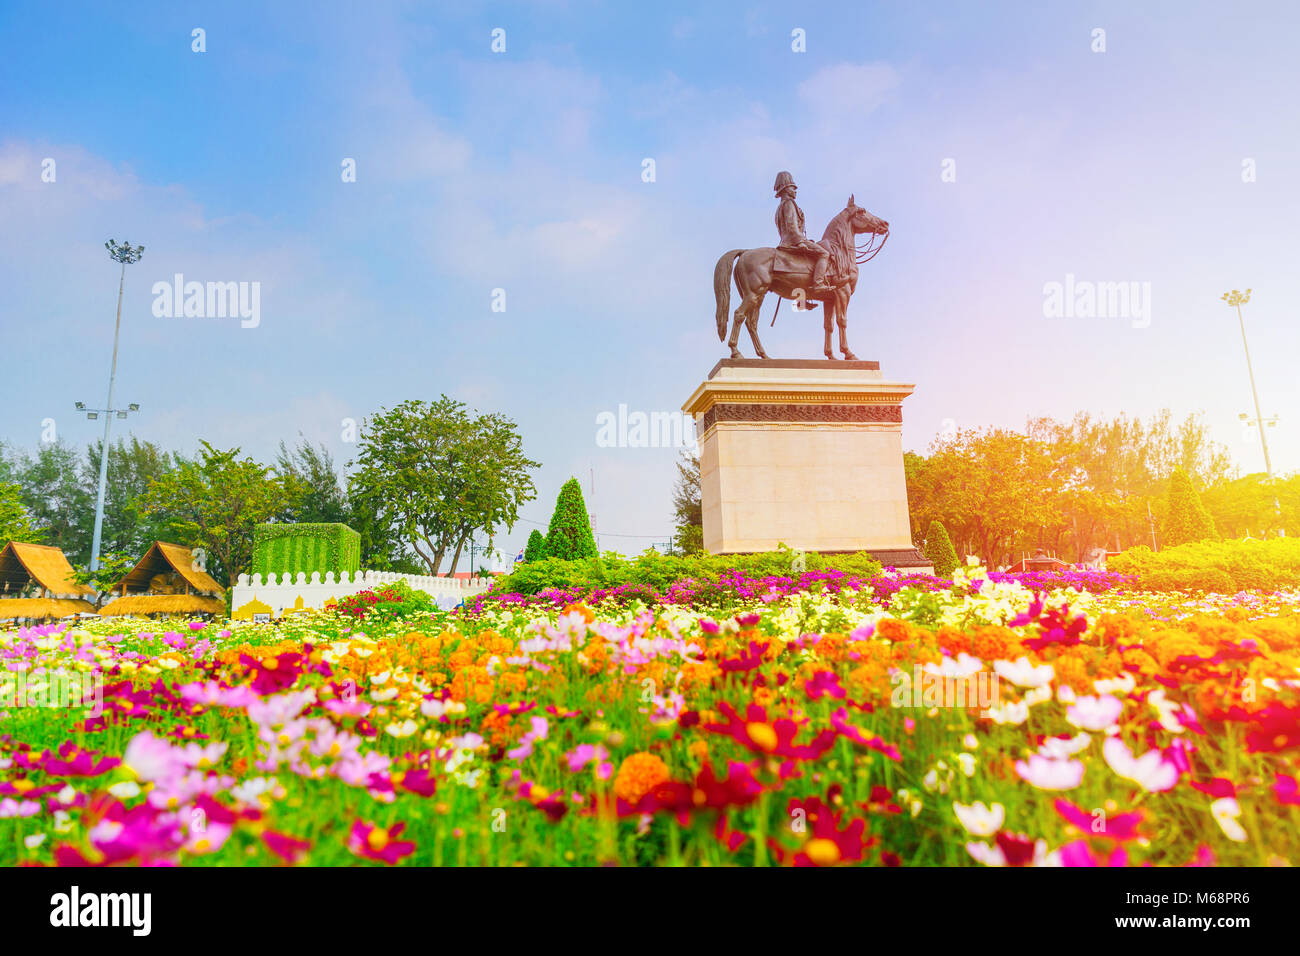 King Rama V Monument - Equestrian statue of Chulalongkorn the Great is an outdoor sculpture Bangkok Travel destination. Stock Photo